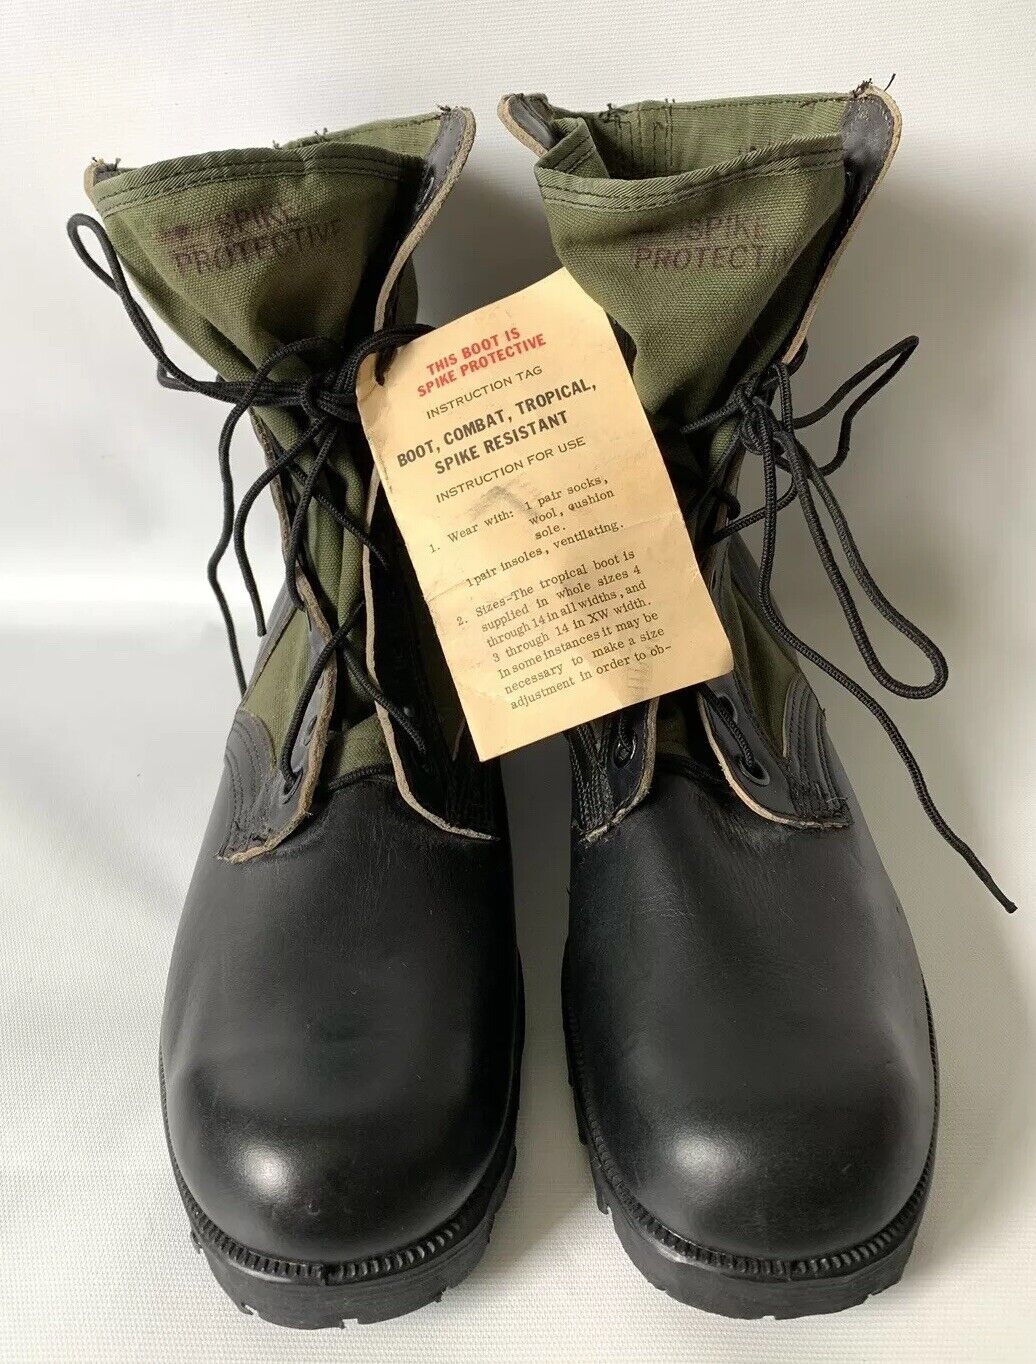 Vtg 60s Deadstock Hi Pals US Military Spike Protective Tropical Combat Boots 12N